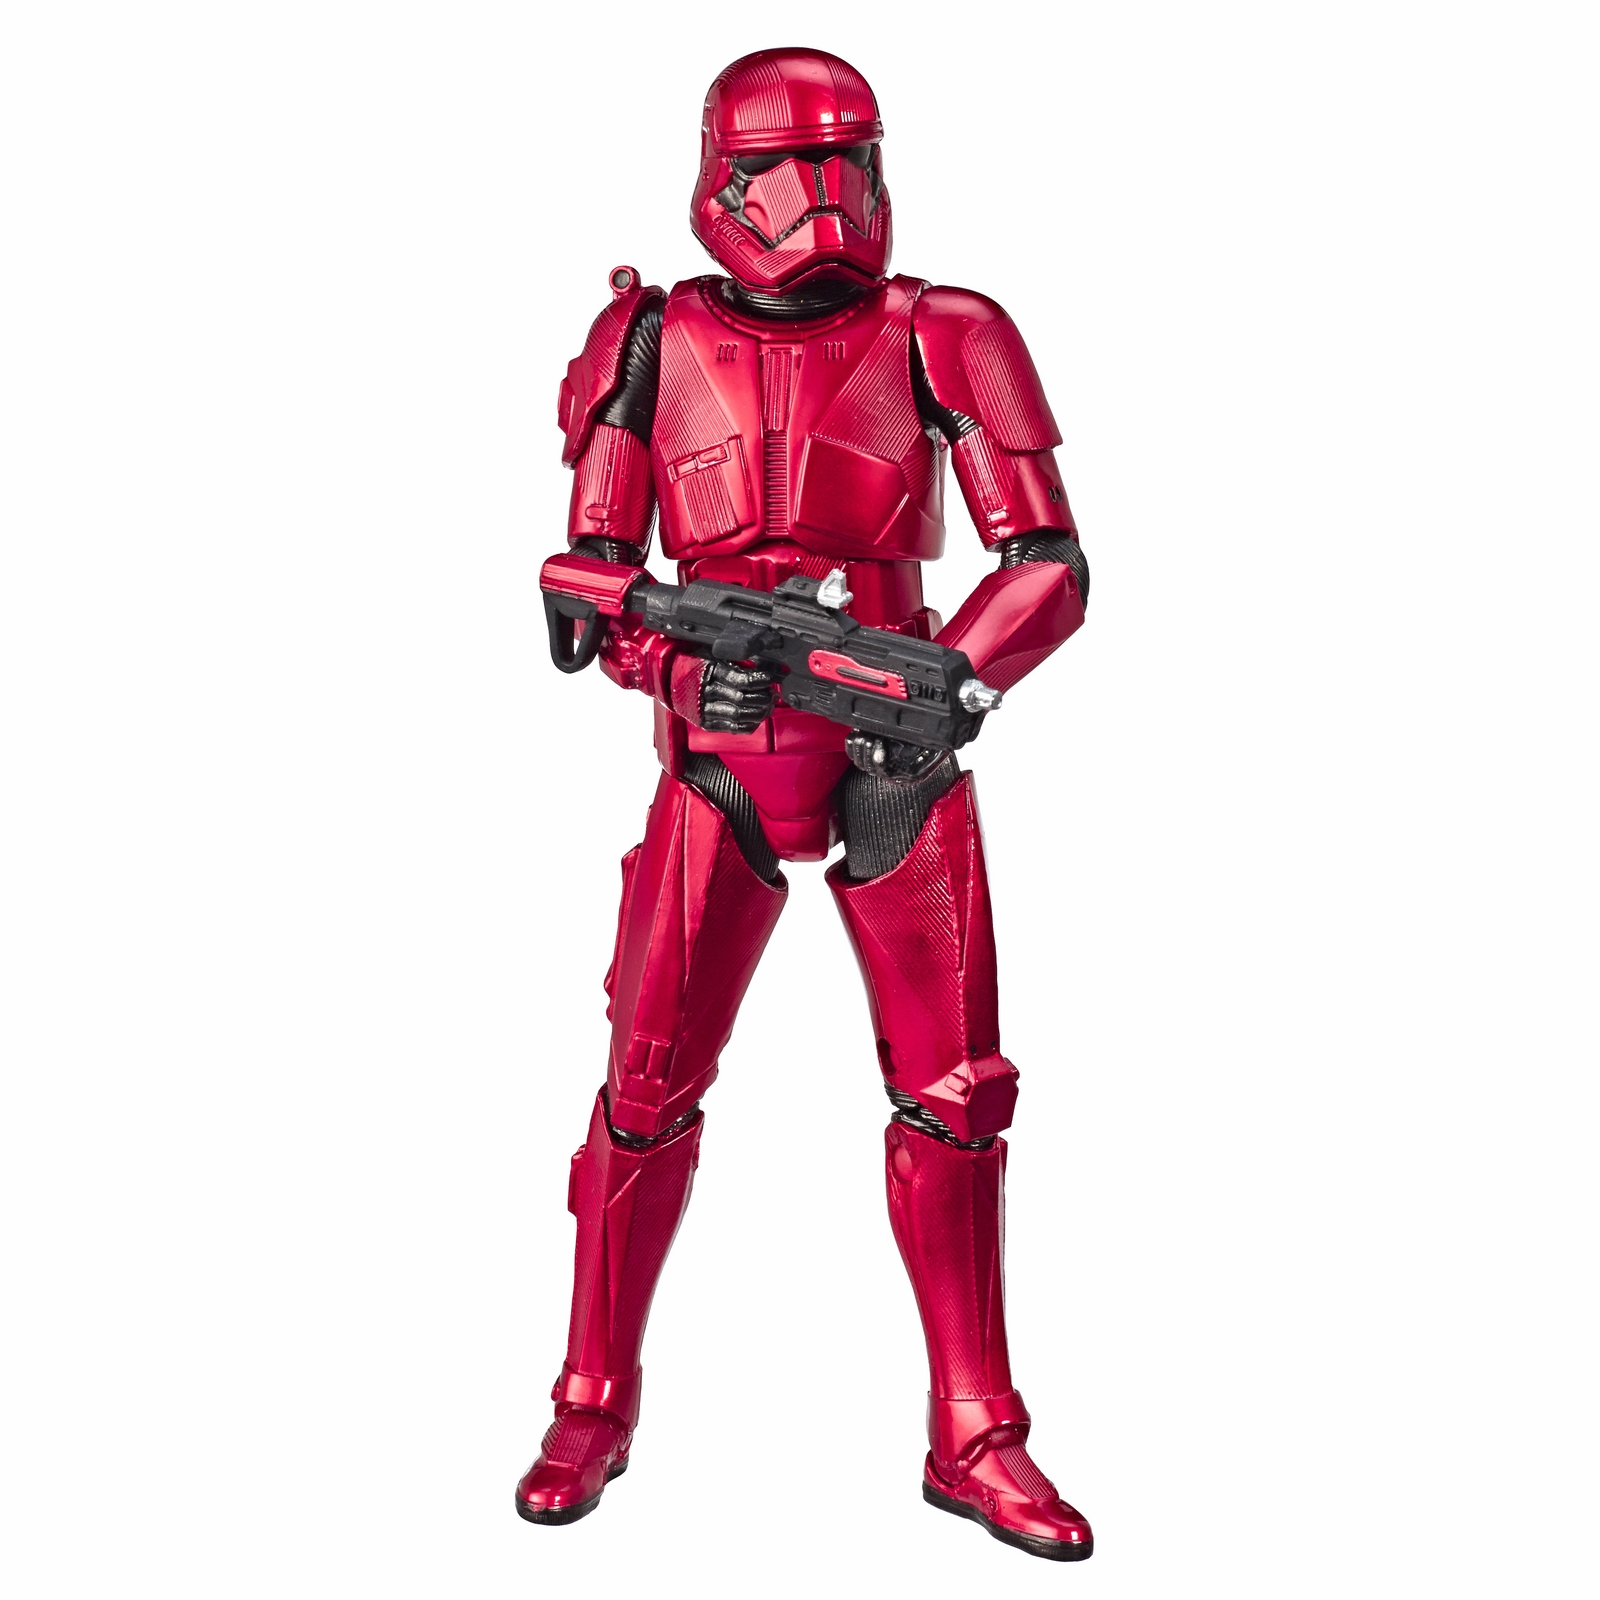 STAR WARS THE BLACK SERIES 6-INCH SITH TROOPER CARBONIZED COLLECTION Figure - oop.jpg